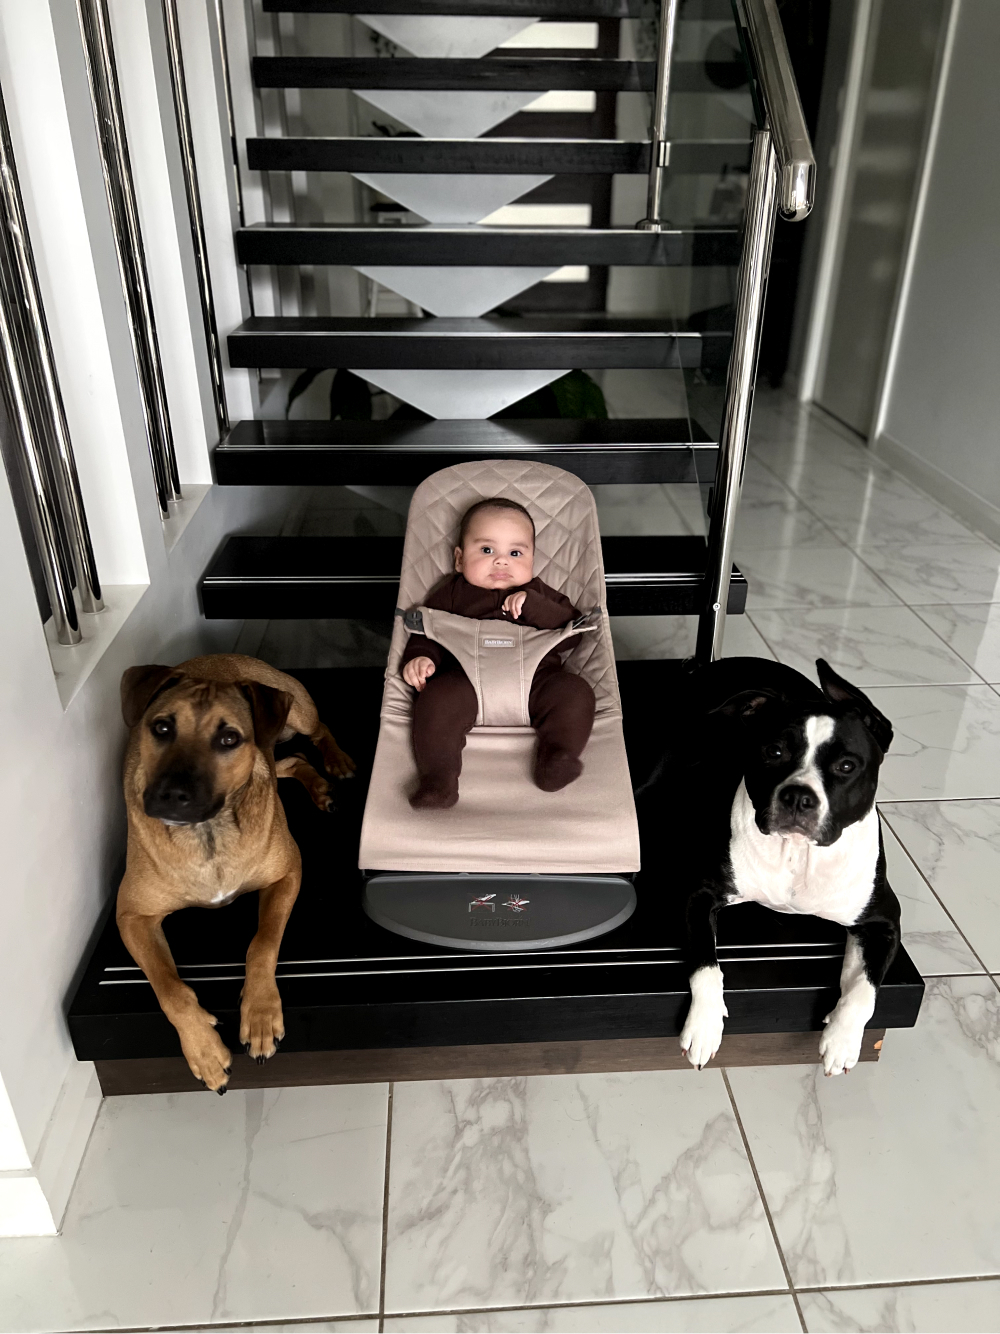 Baby Elijah in a bouncer in between the two dogs